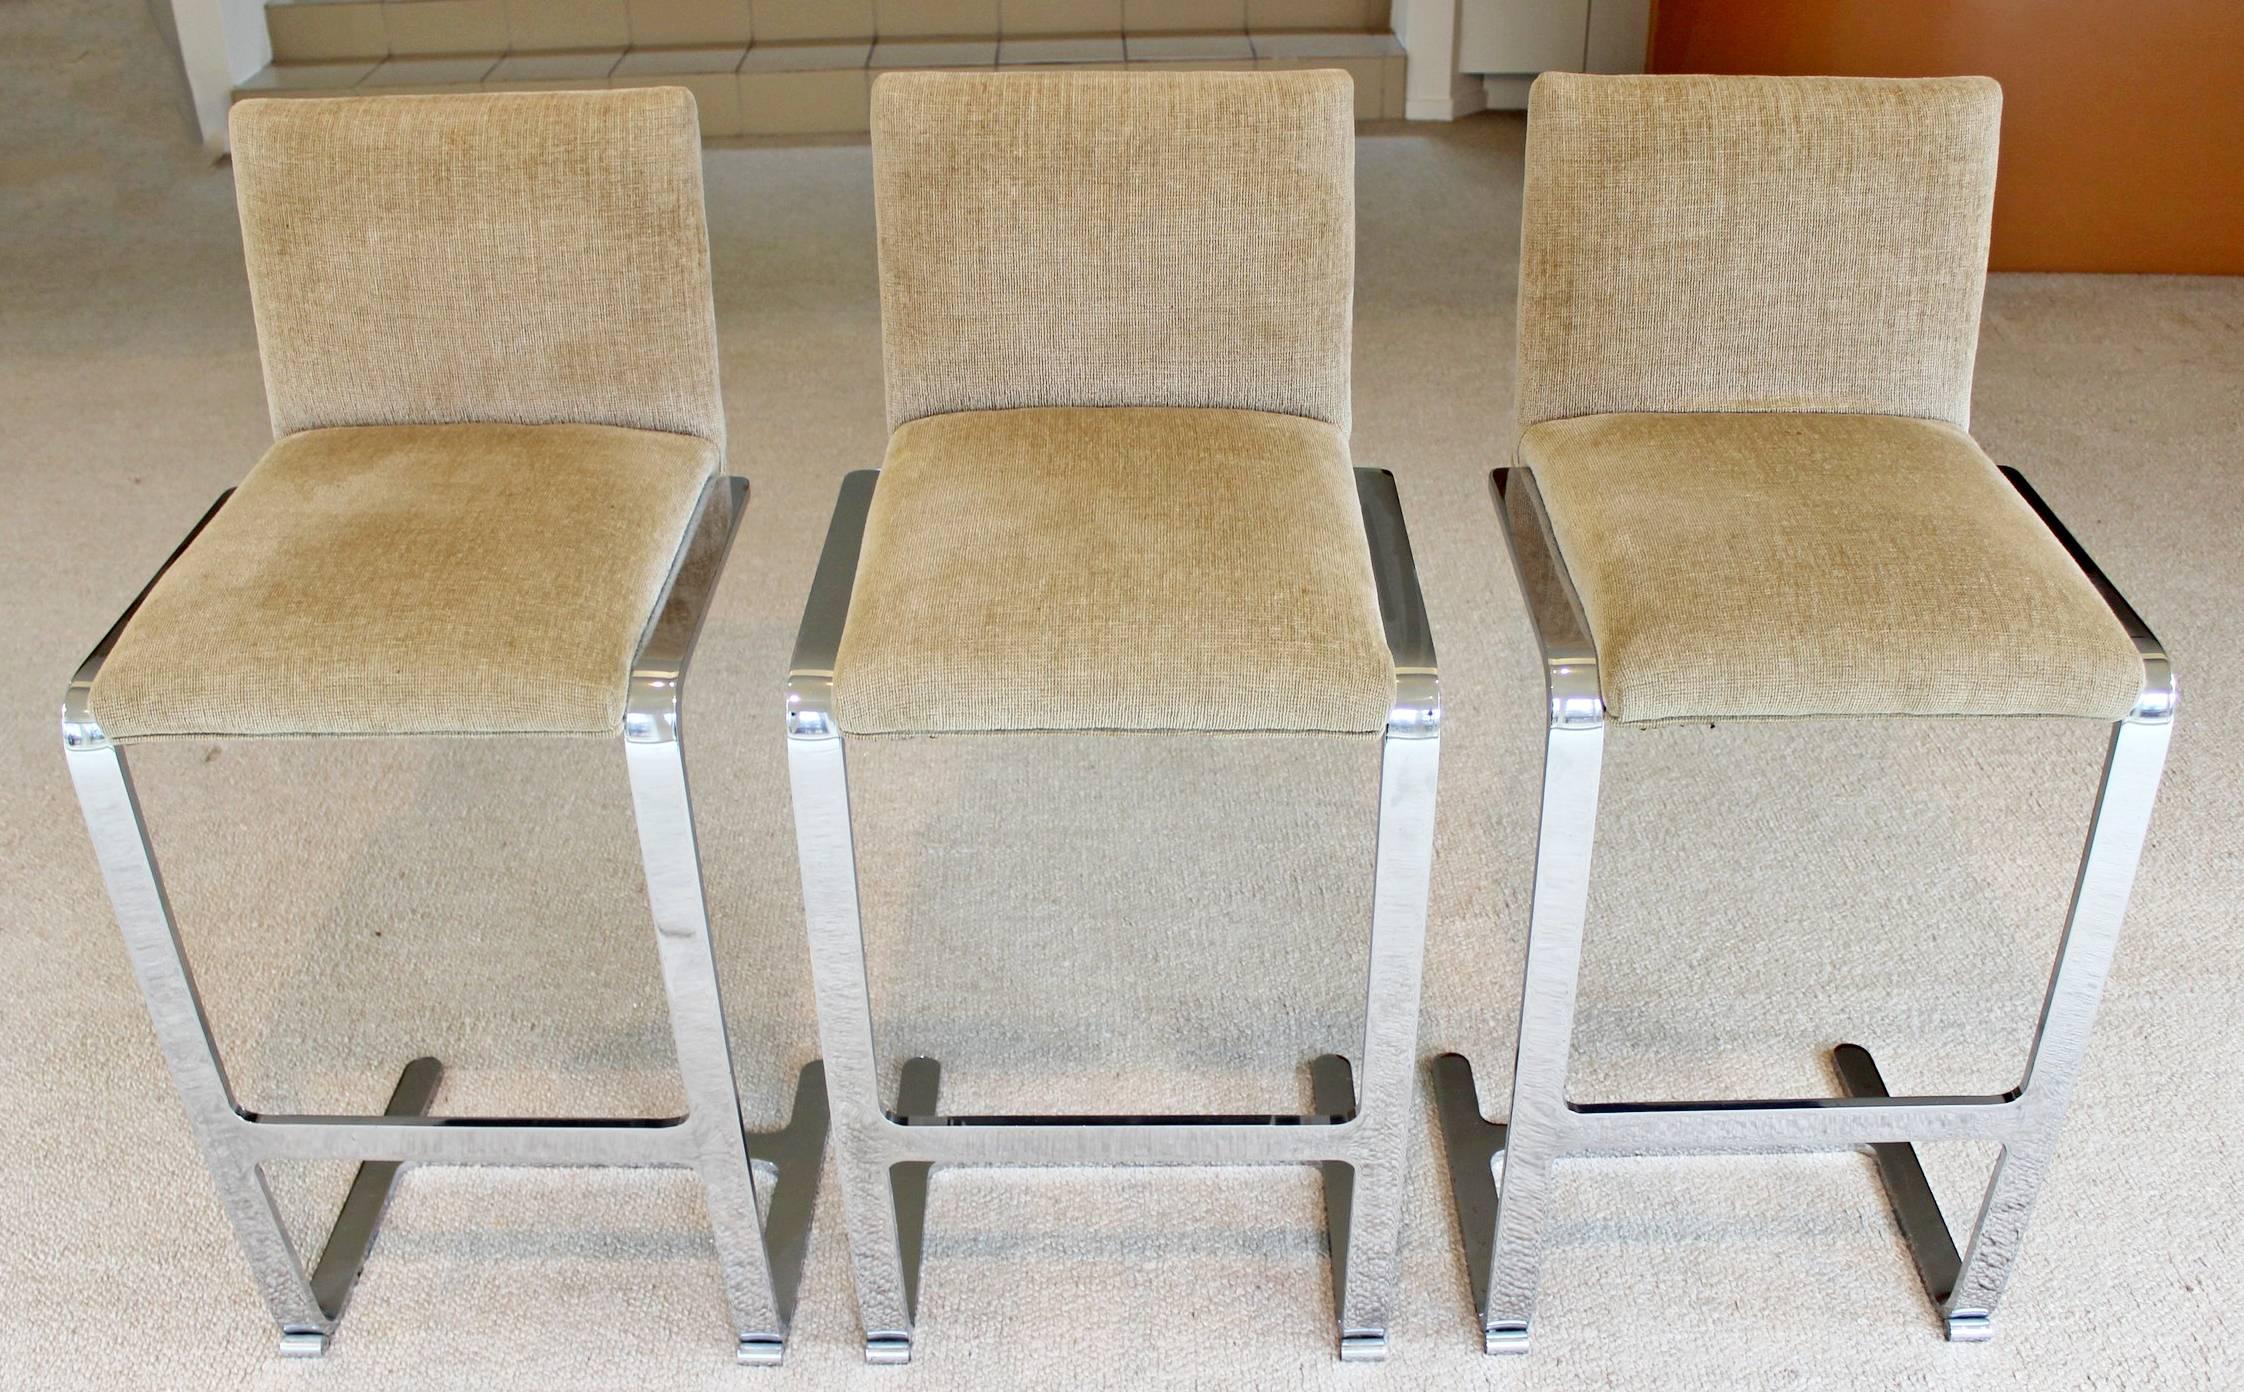 For your consideration is a set of three, flat bar chrome, Brno bar stools, by Ludwig Mies van der Rohe for Knoll, circa 1970s. In excellent condition. The dimensions are 17